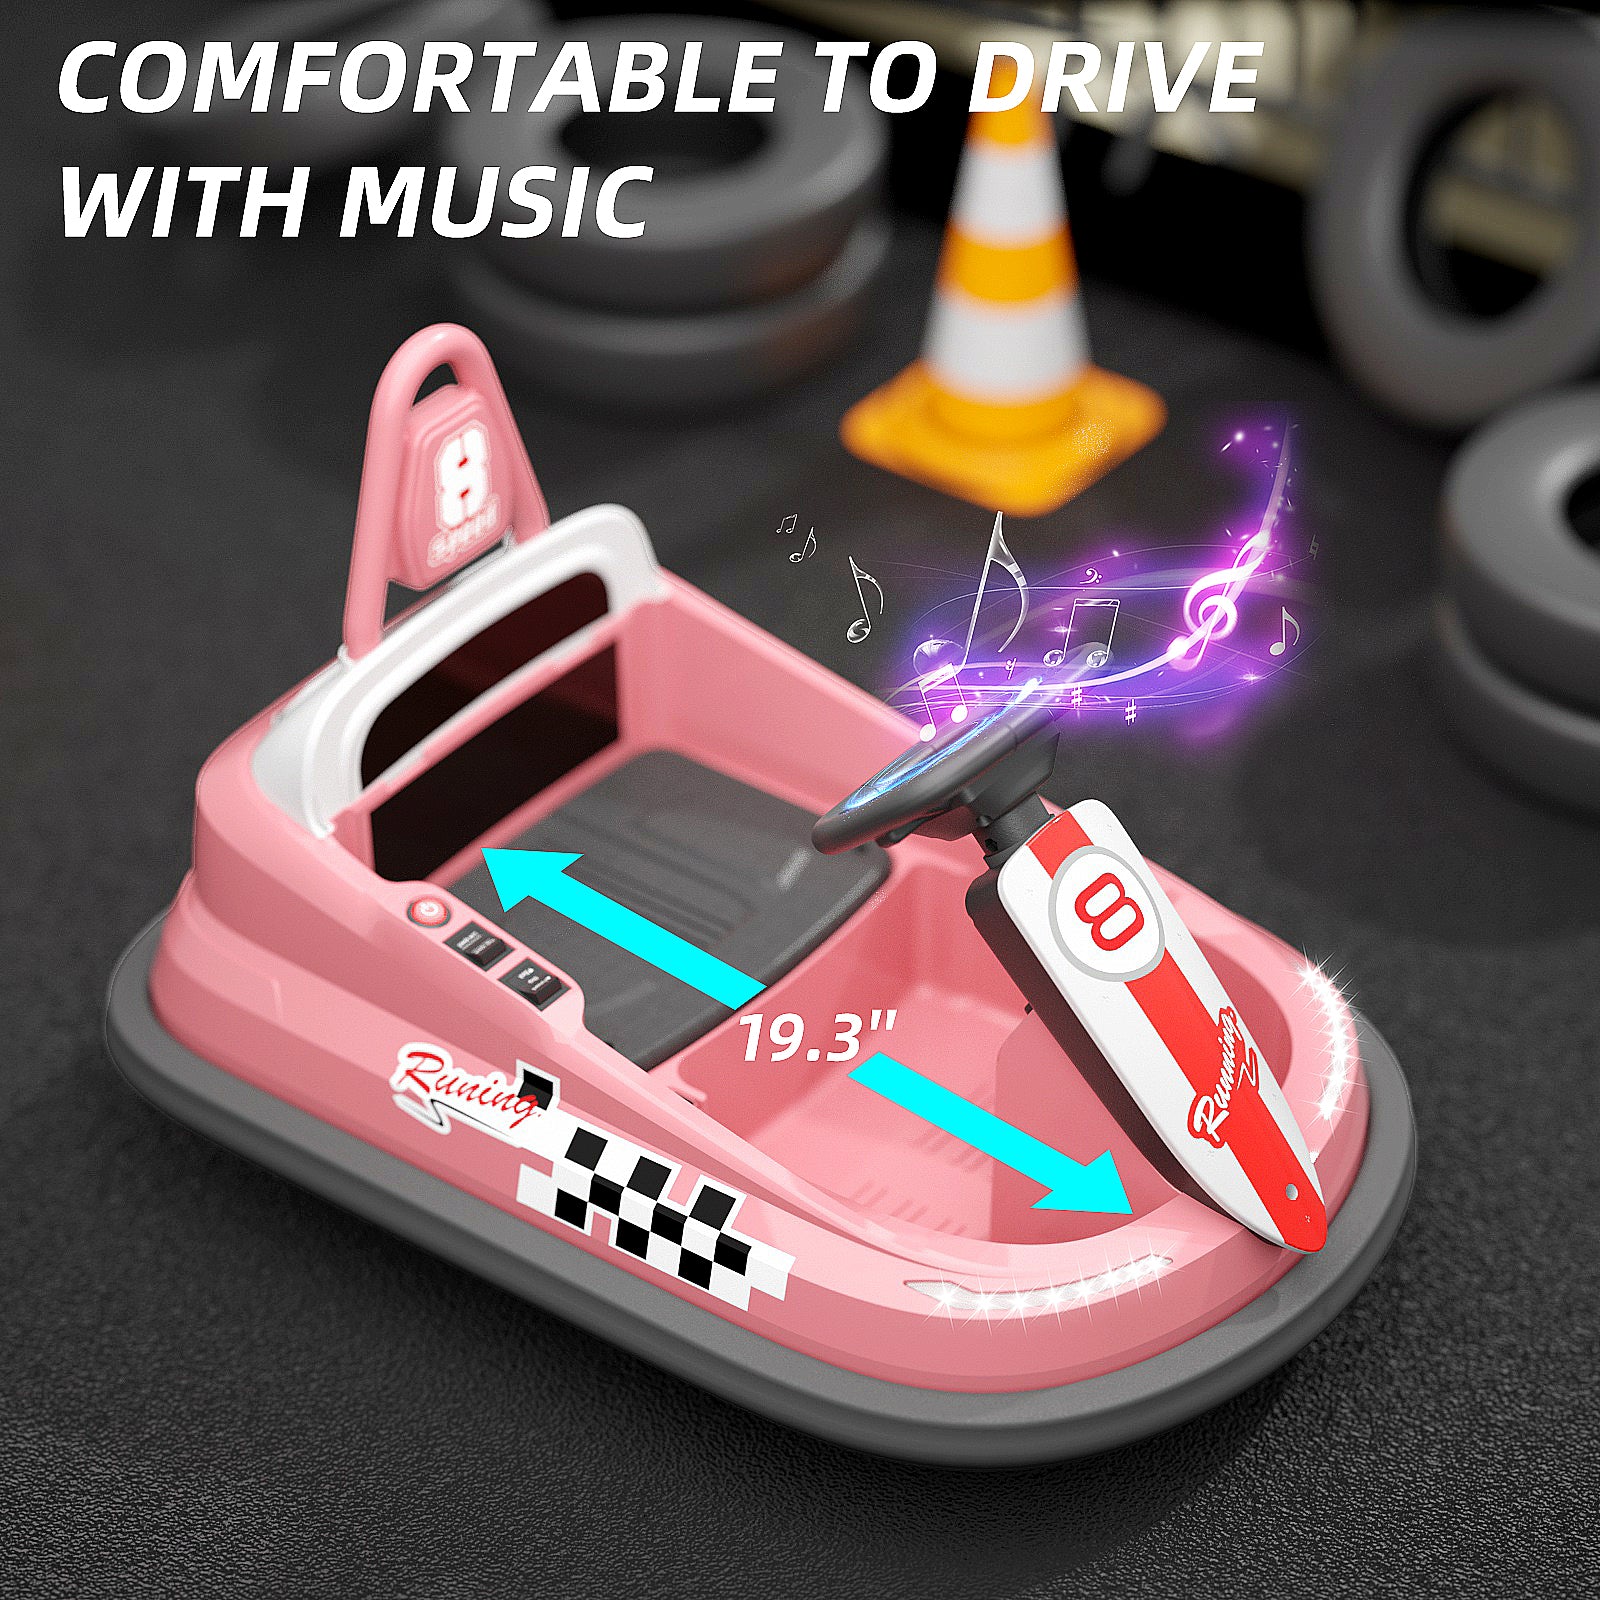 XJD 360° Spinning Toddlers Battery Powered Electric Bumper Cars for Kids Age 1.5+, Pink